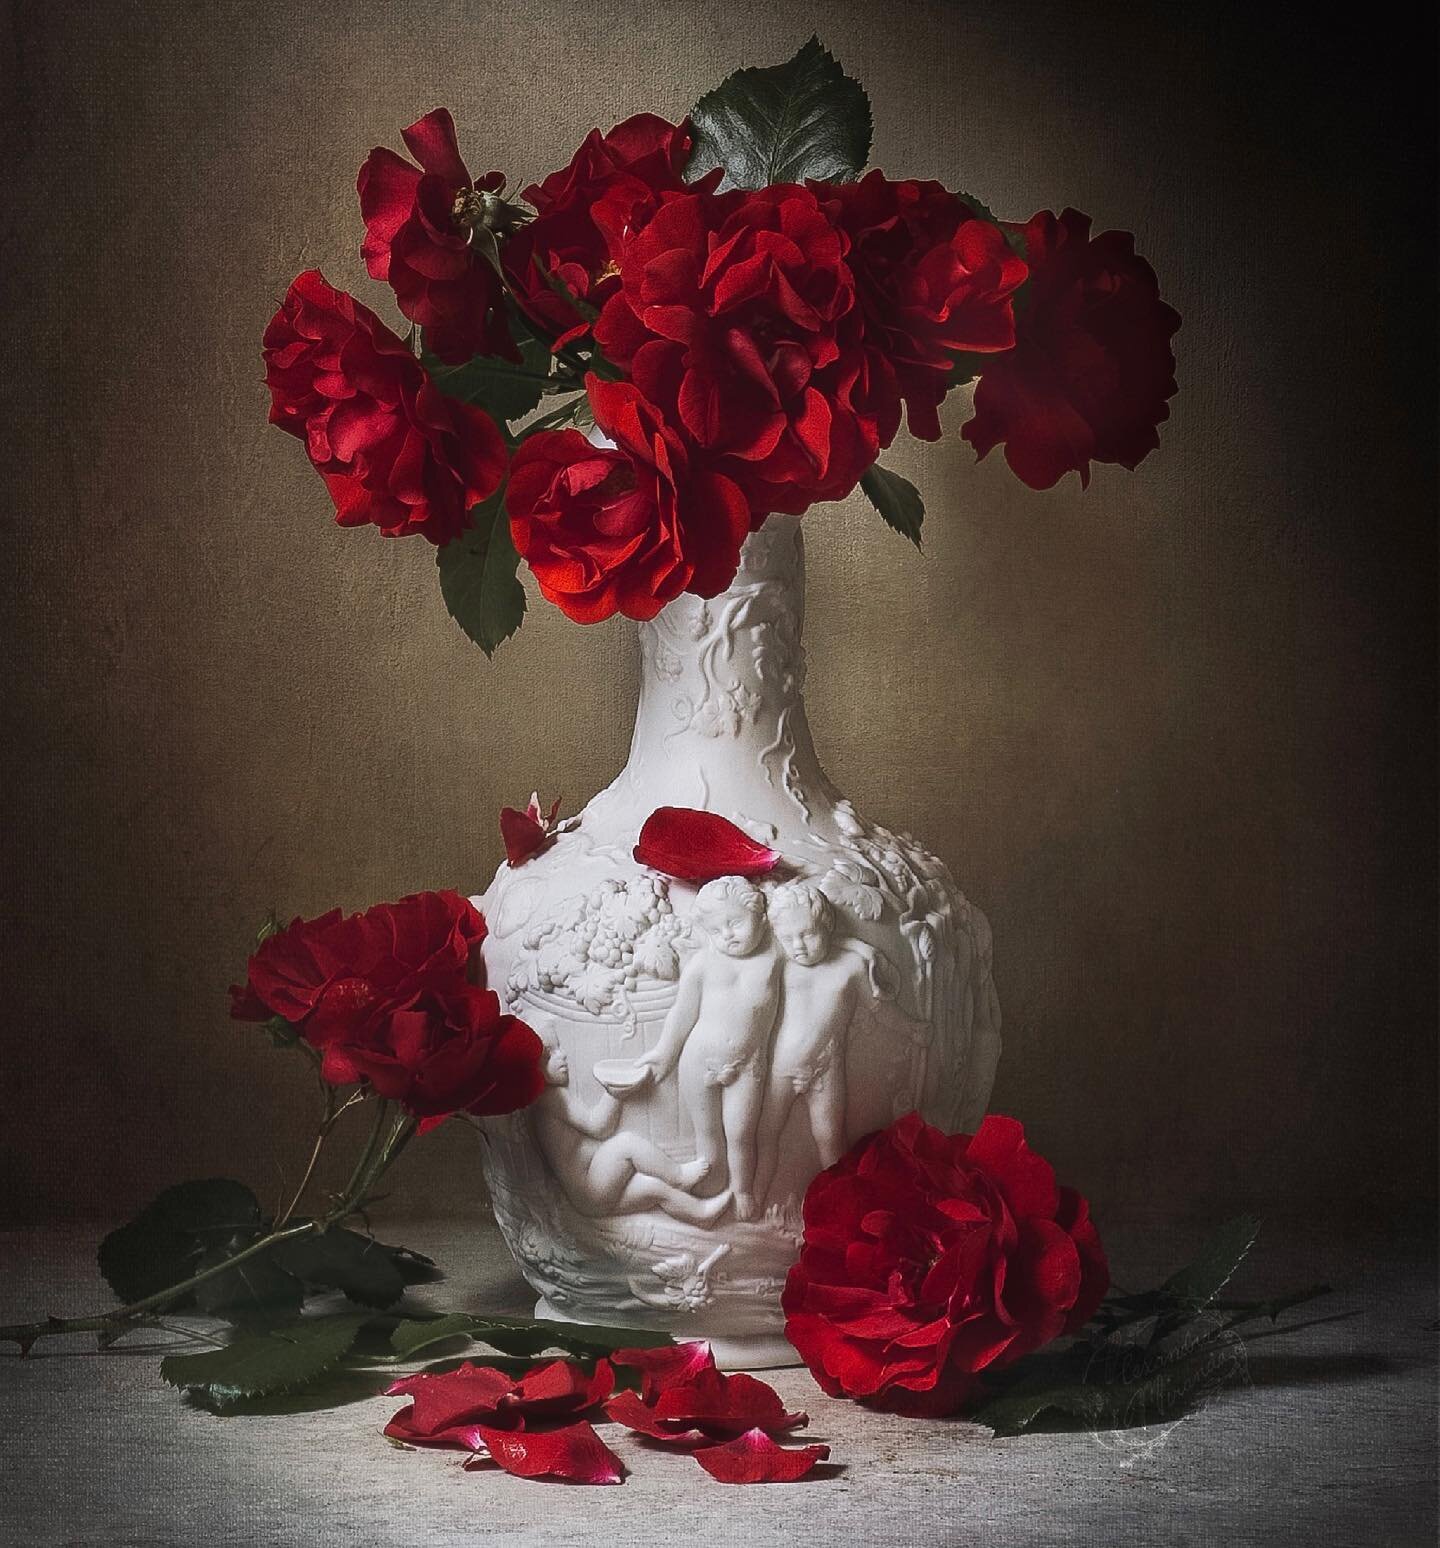 O my Luve&rsquo;s like a red, red rose,
That&rsquo;s newly sprung in June;
O my Luve&rsquo;s like the melodie
That&rsquo;s sweetly play&rsquo;d in tune&hellip; 
-Robert Burns 

🌹🌹🌹Rosa Knock out in rococo? vase. 🌹🌹🌹
🌹
🌹
🌹
🌹
🌹
#stilllifepho